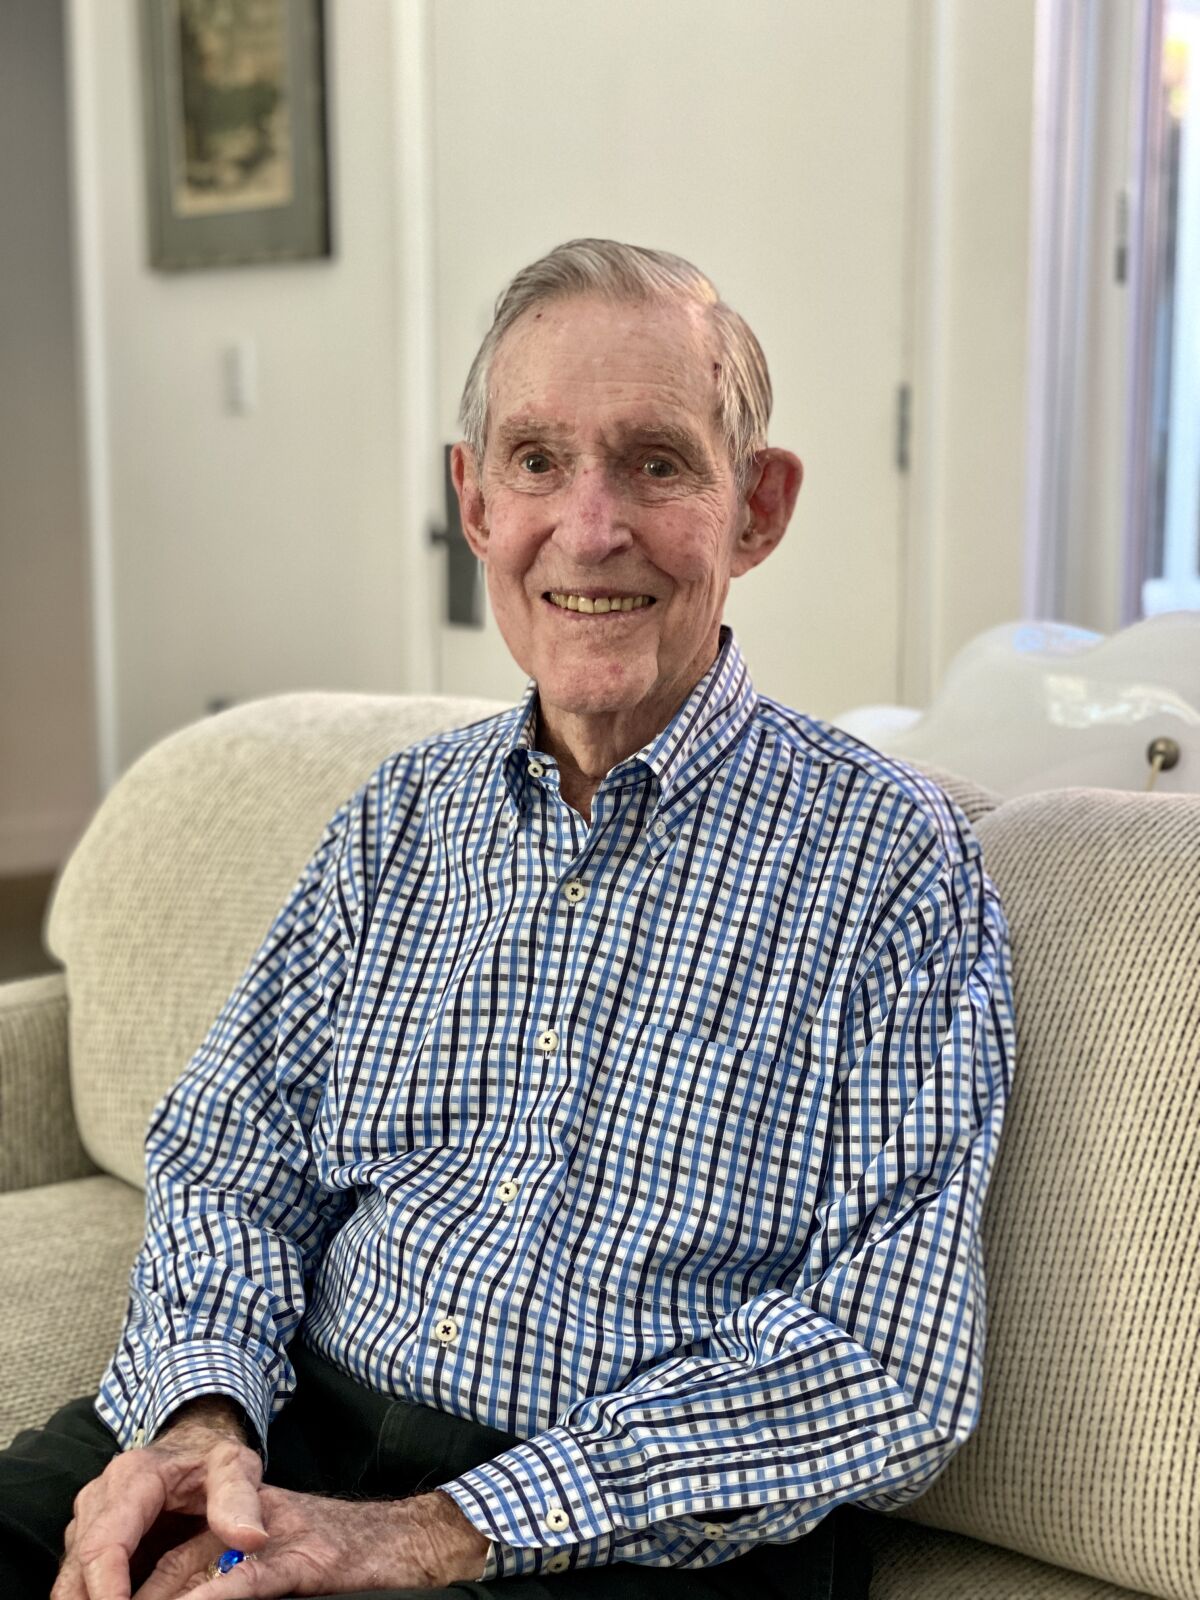 Robert Smothers called his military service the highlight of his nearly 99 years.